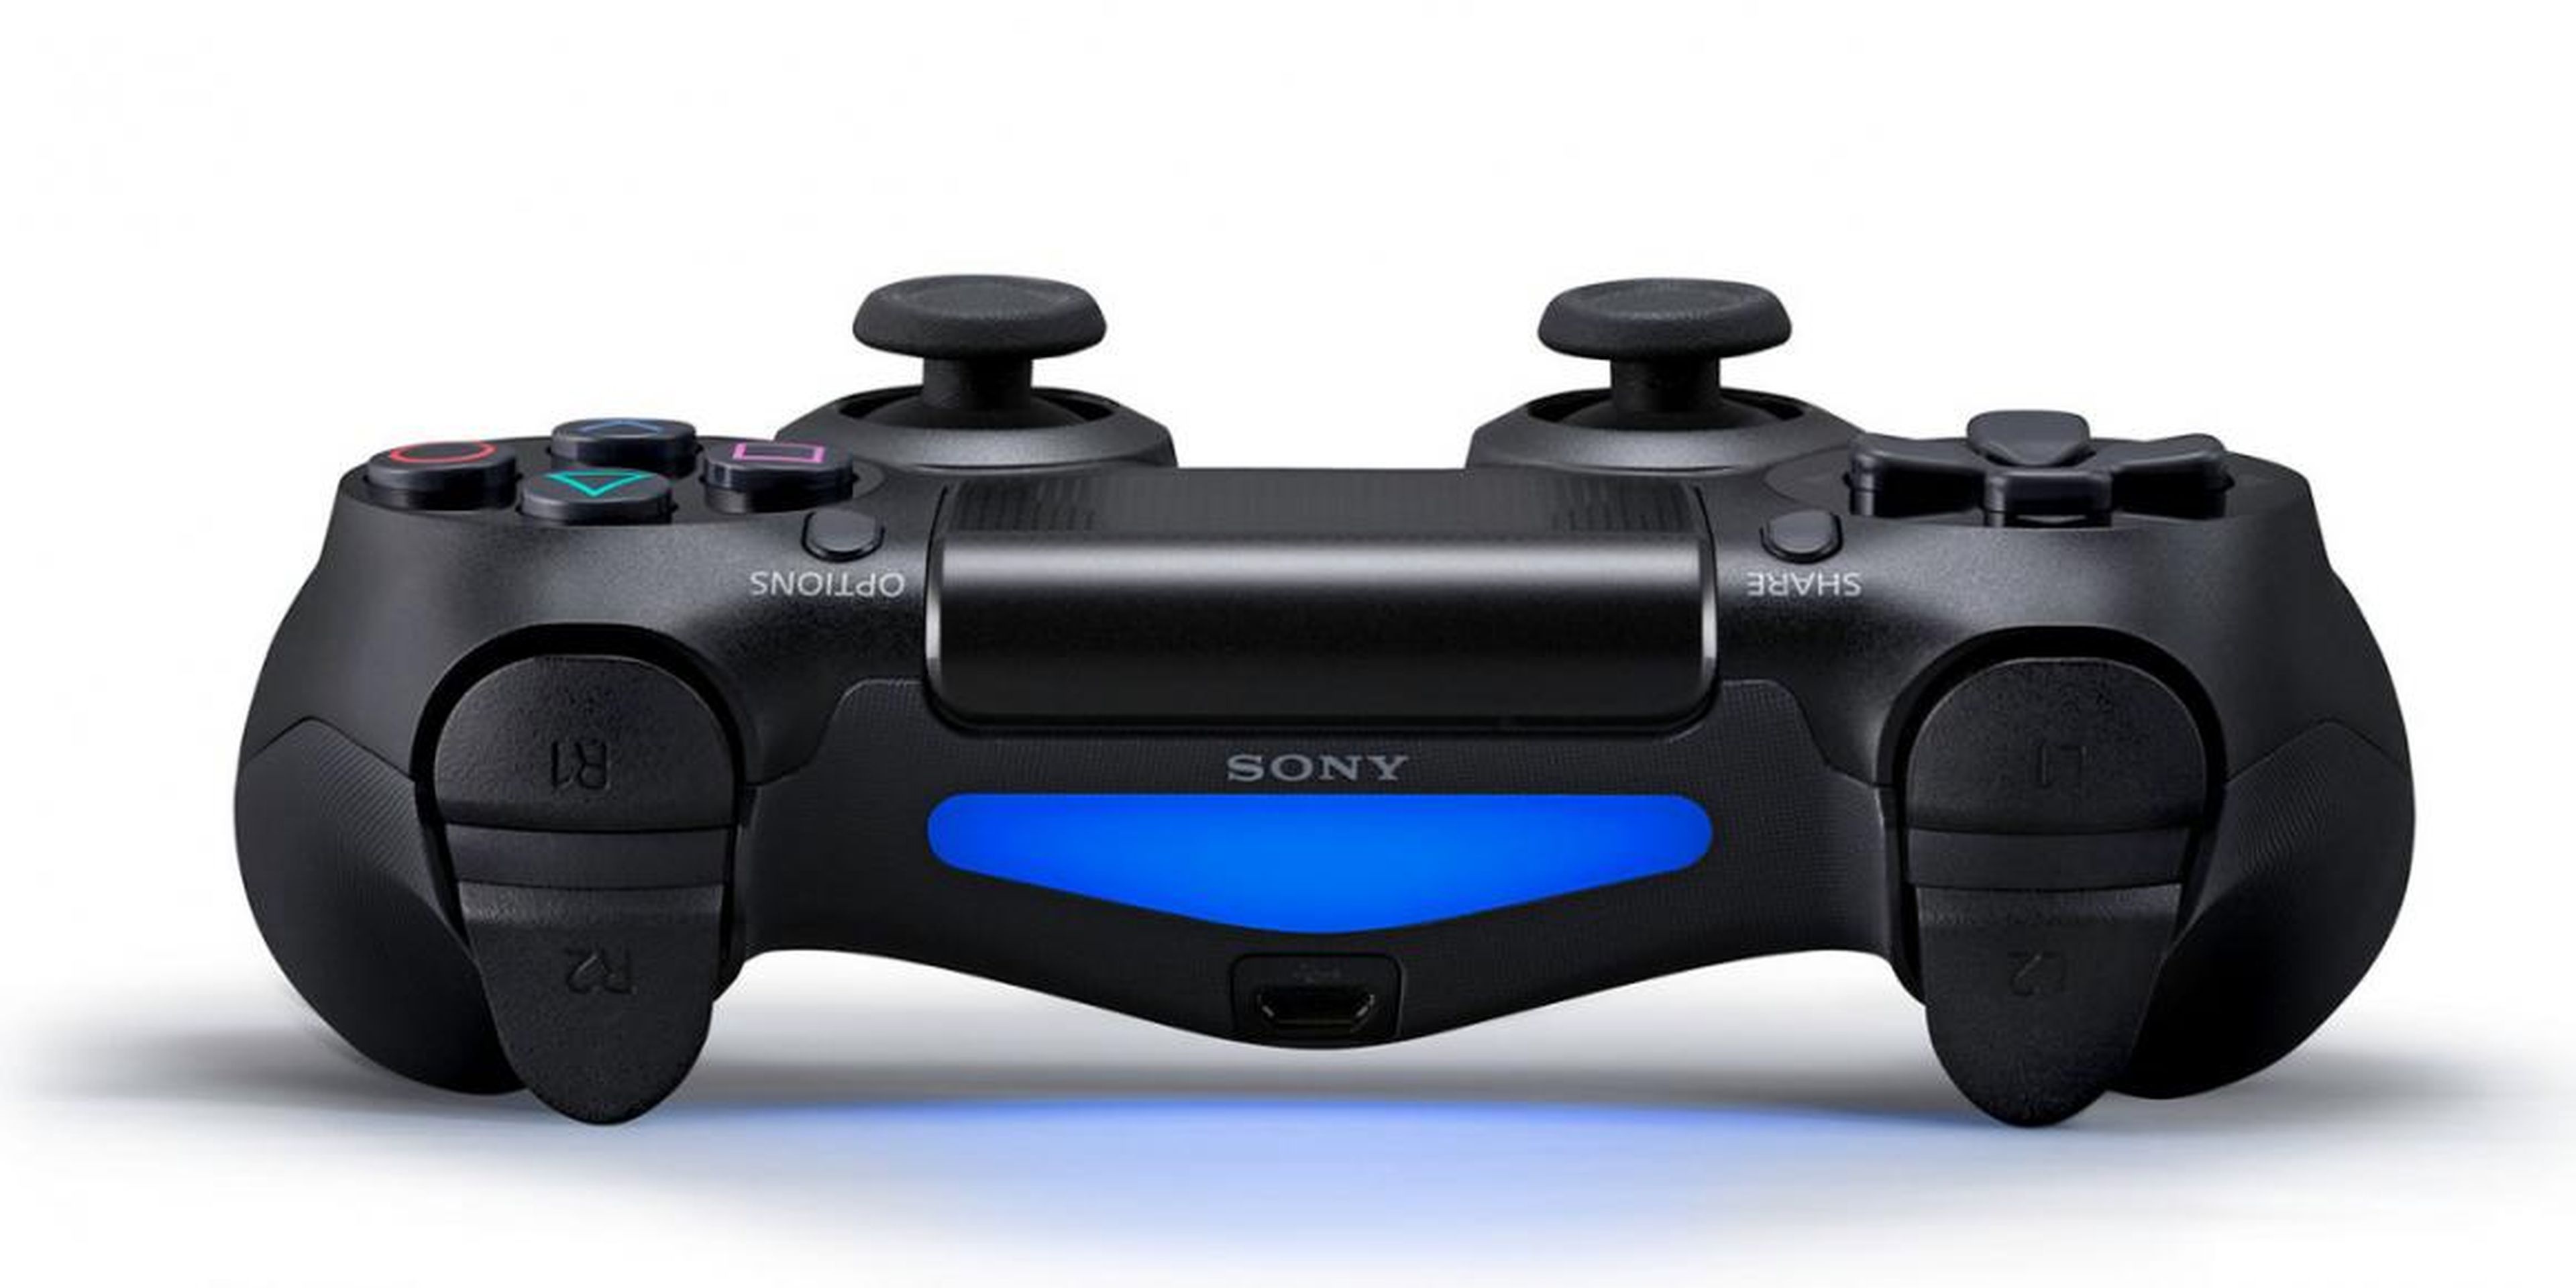 PlayStation 5 details are emerging.